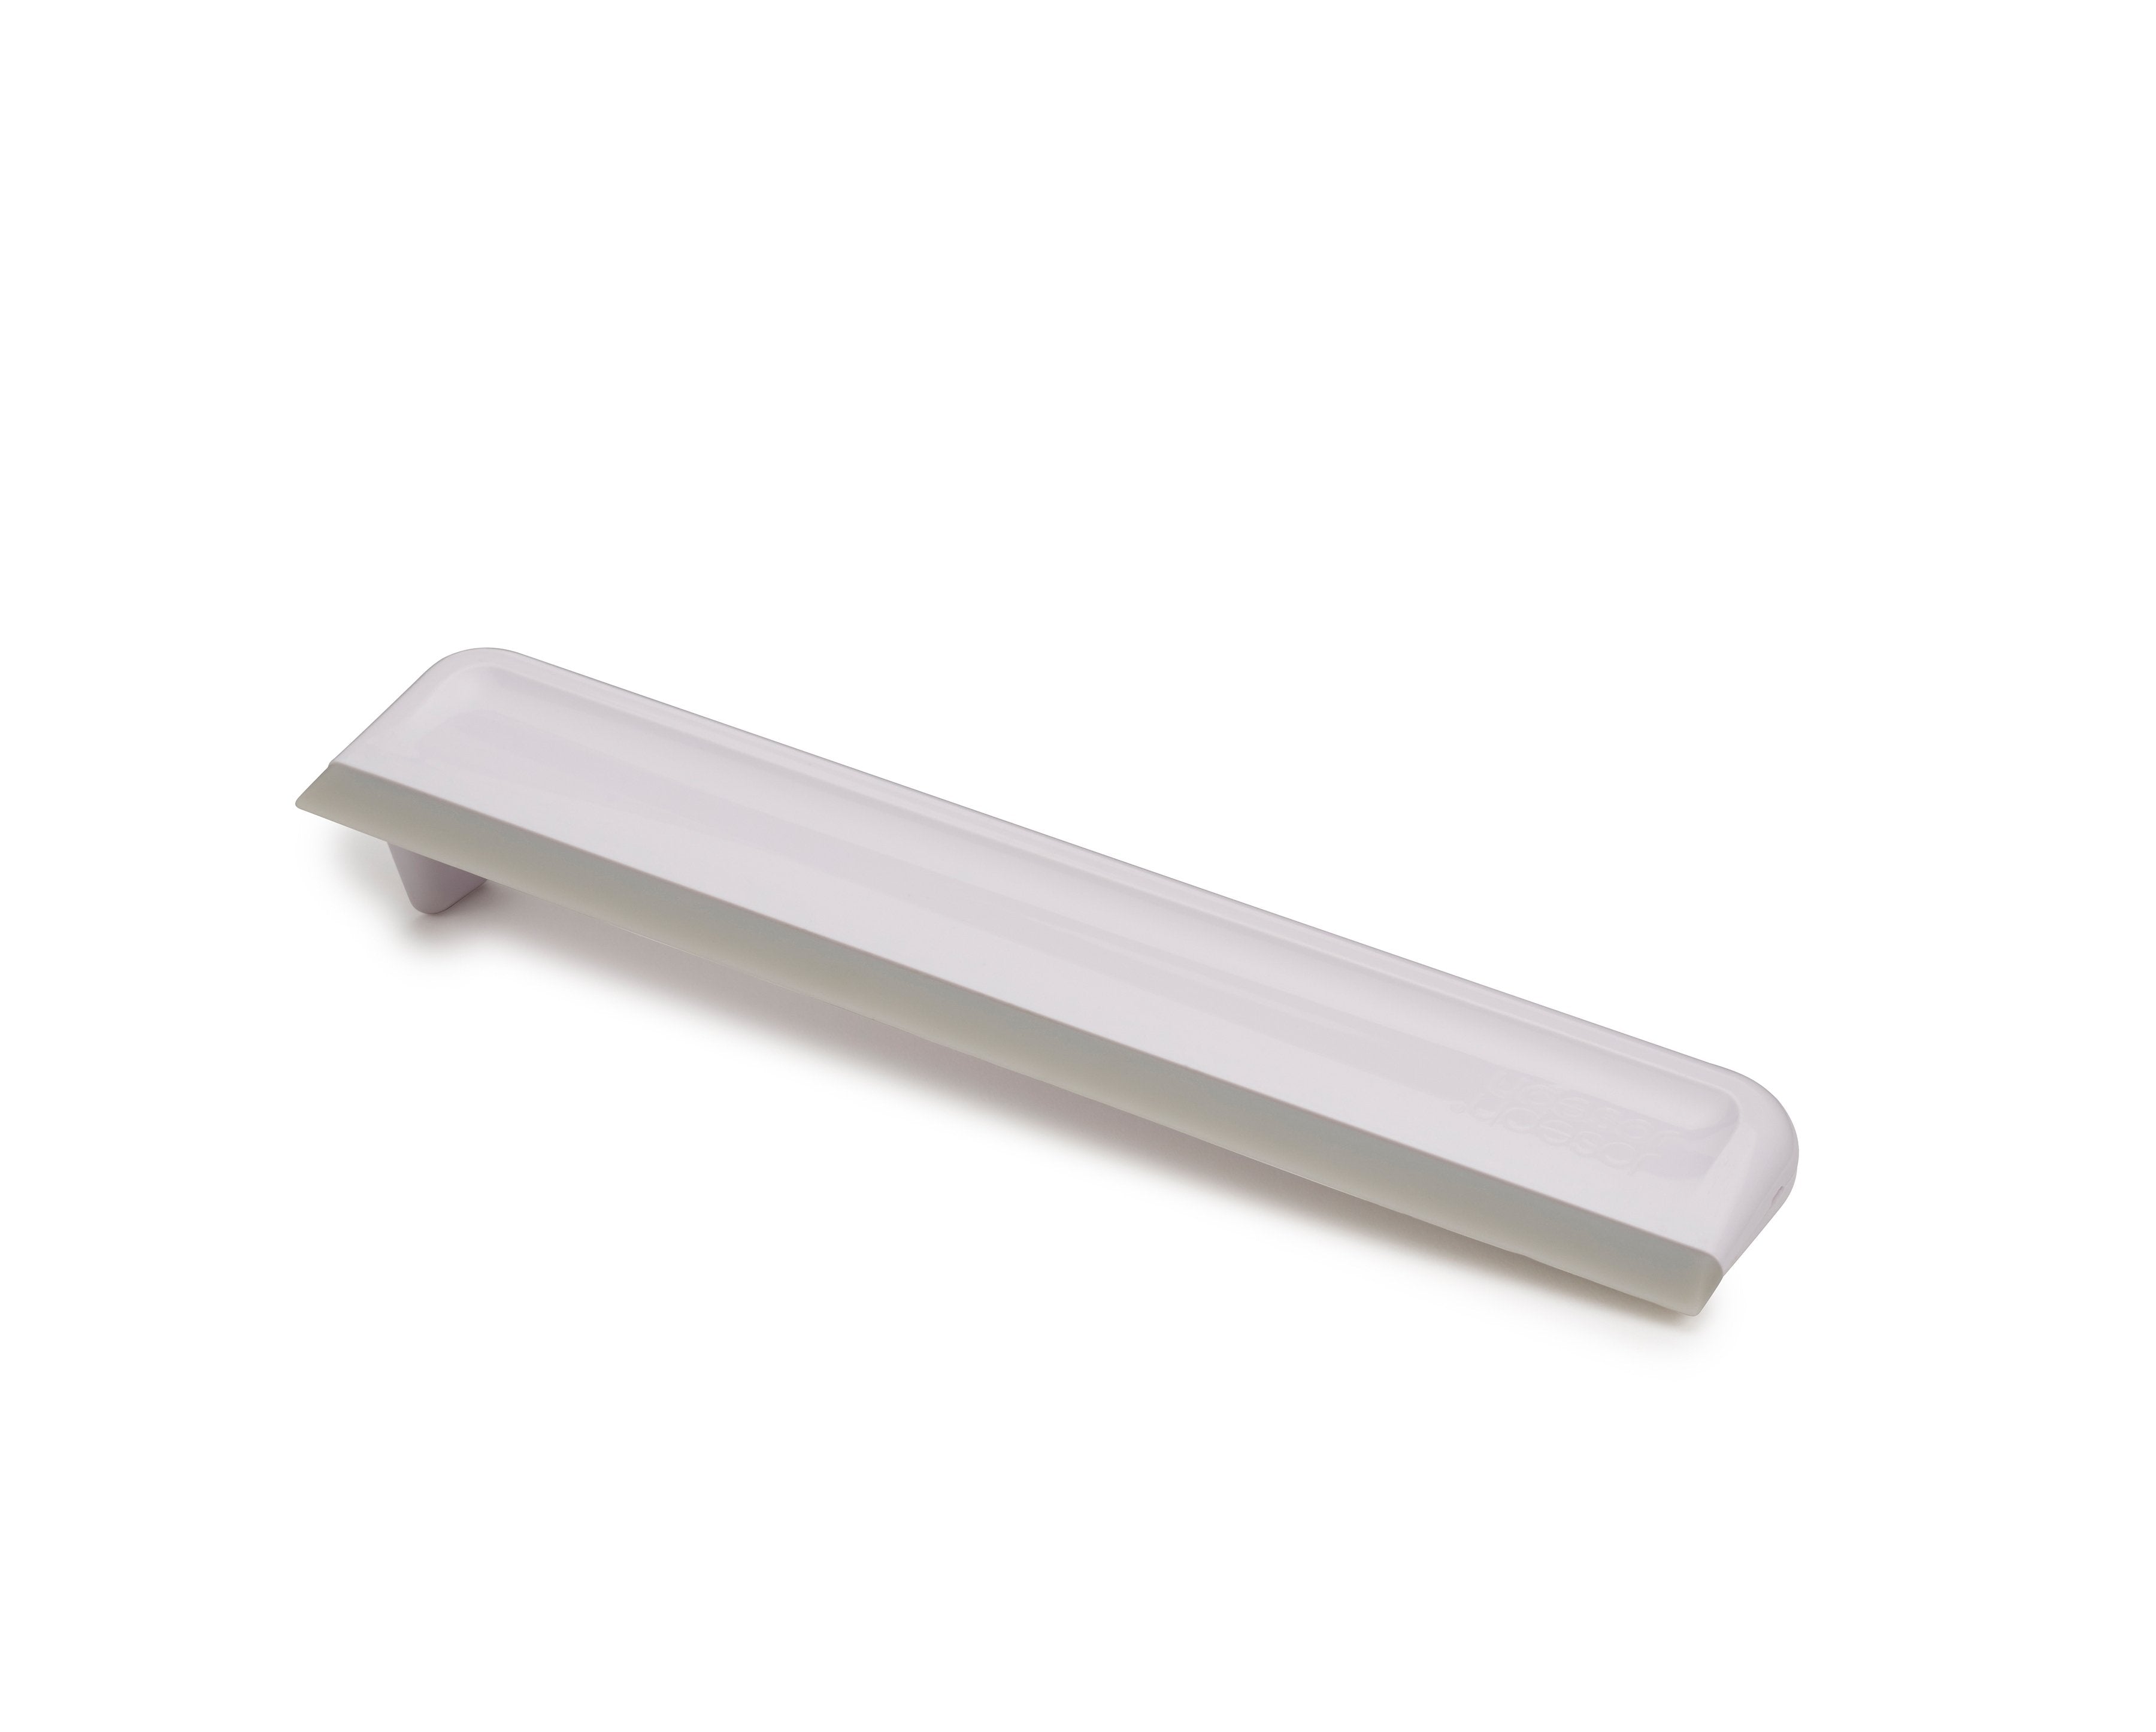 BEON.COM.AU  This neat, slimline shower squeegee features a flexible silicone blade for precision cleaning and a handy hook for hanging over a shower screen or shelf.  Slimline, space-saving design Flexible silicone blade for precision cleaning Suitable for wiping shower screens, mirrors and tiles Ideal for ... Joseph Joseph at BEON.COM.AU